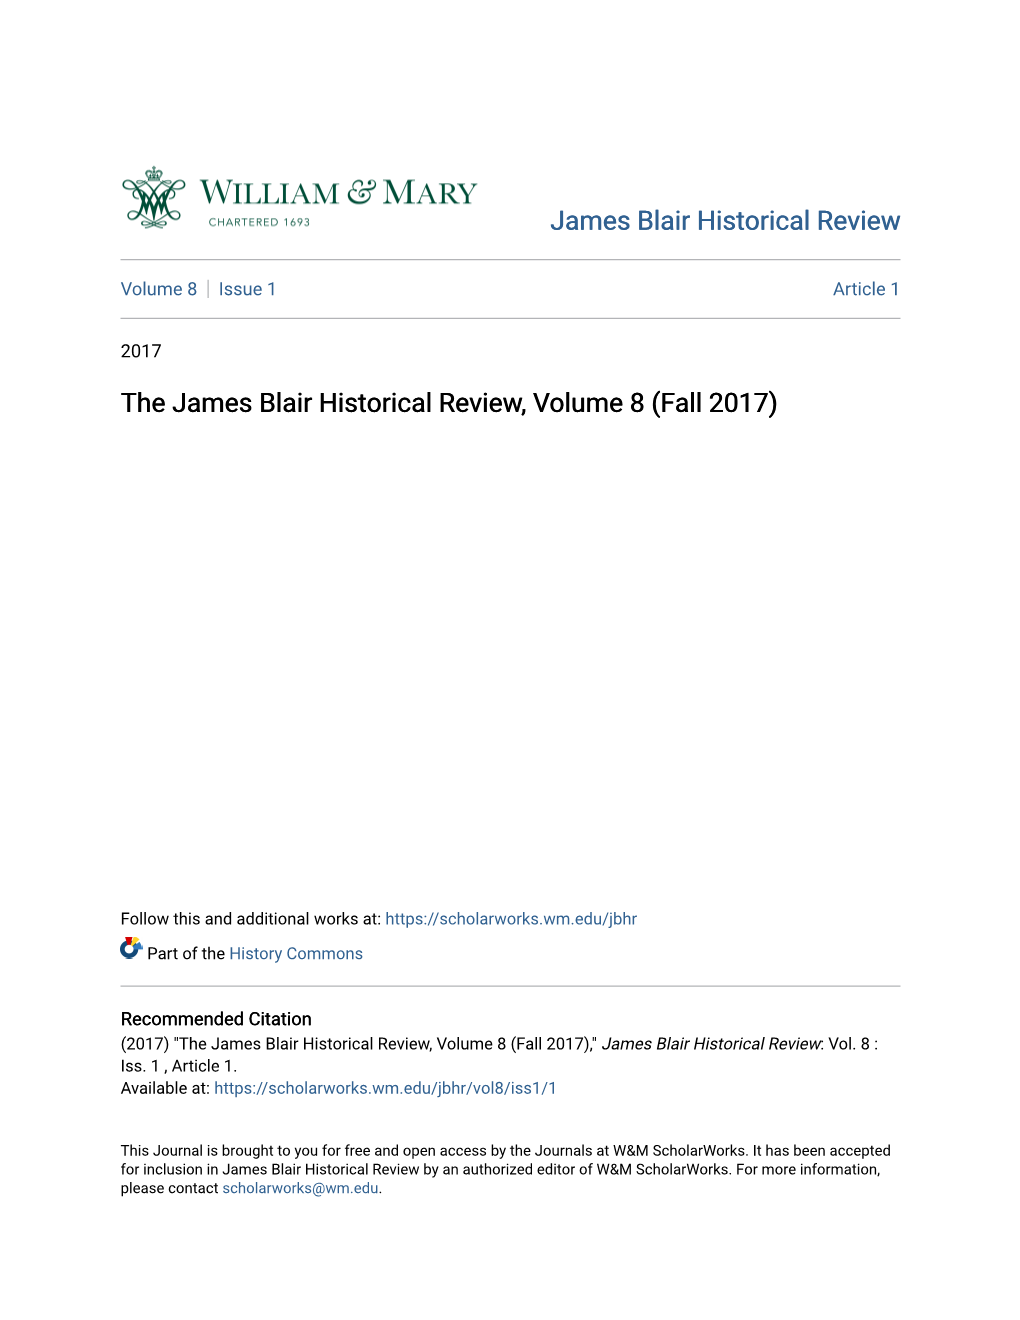 The James Blair Historical Review, Volume 8 (Fall 2017)